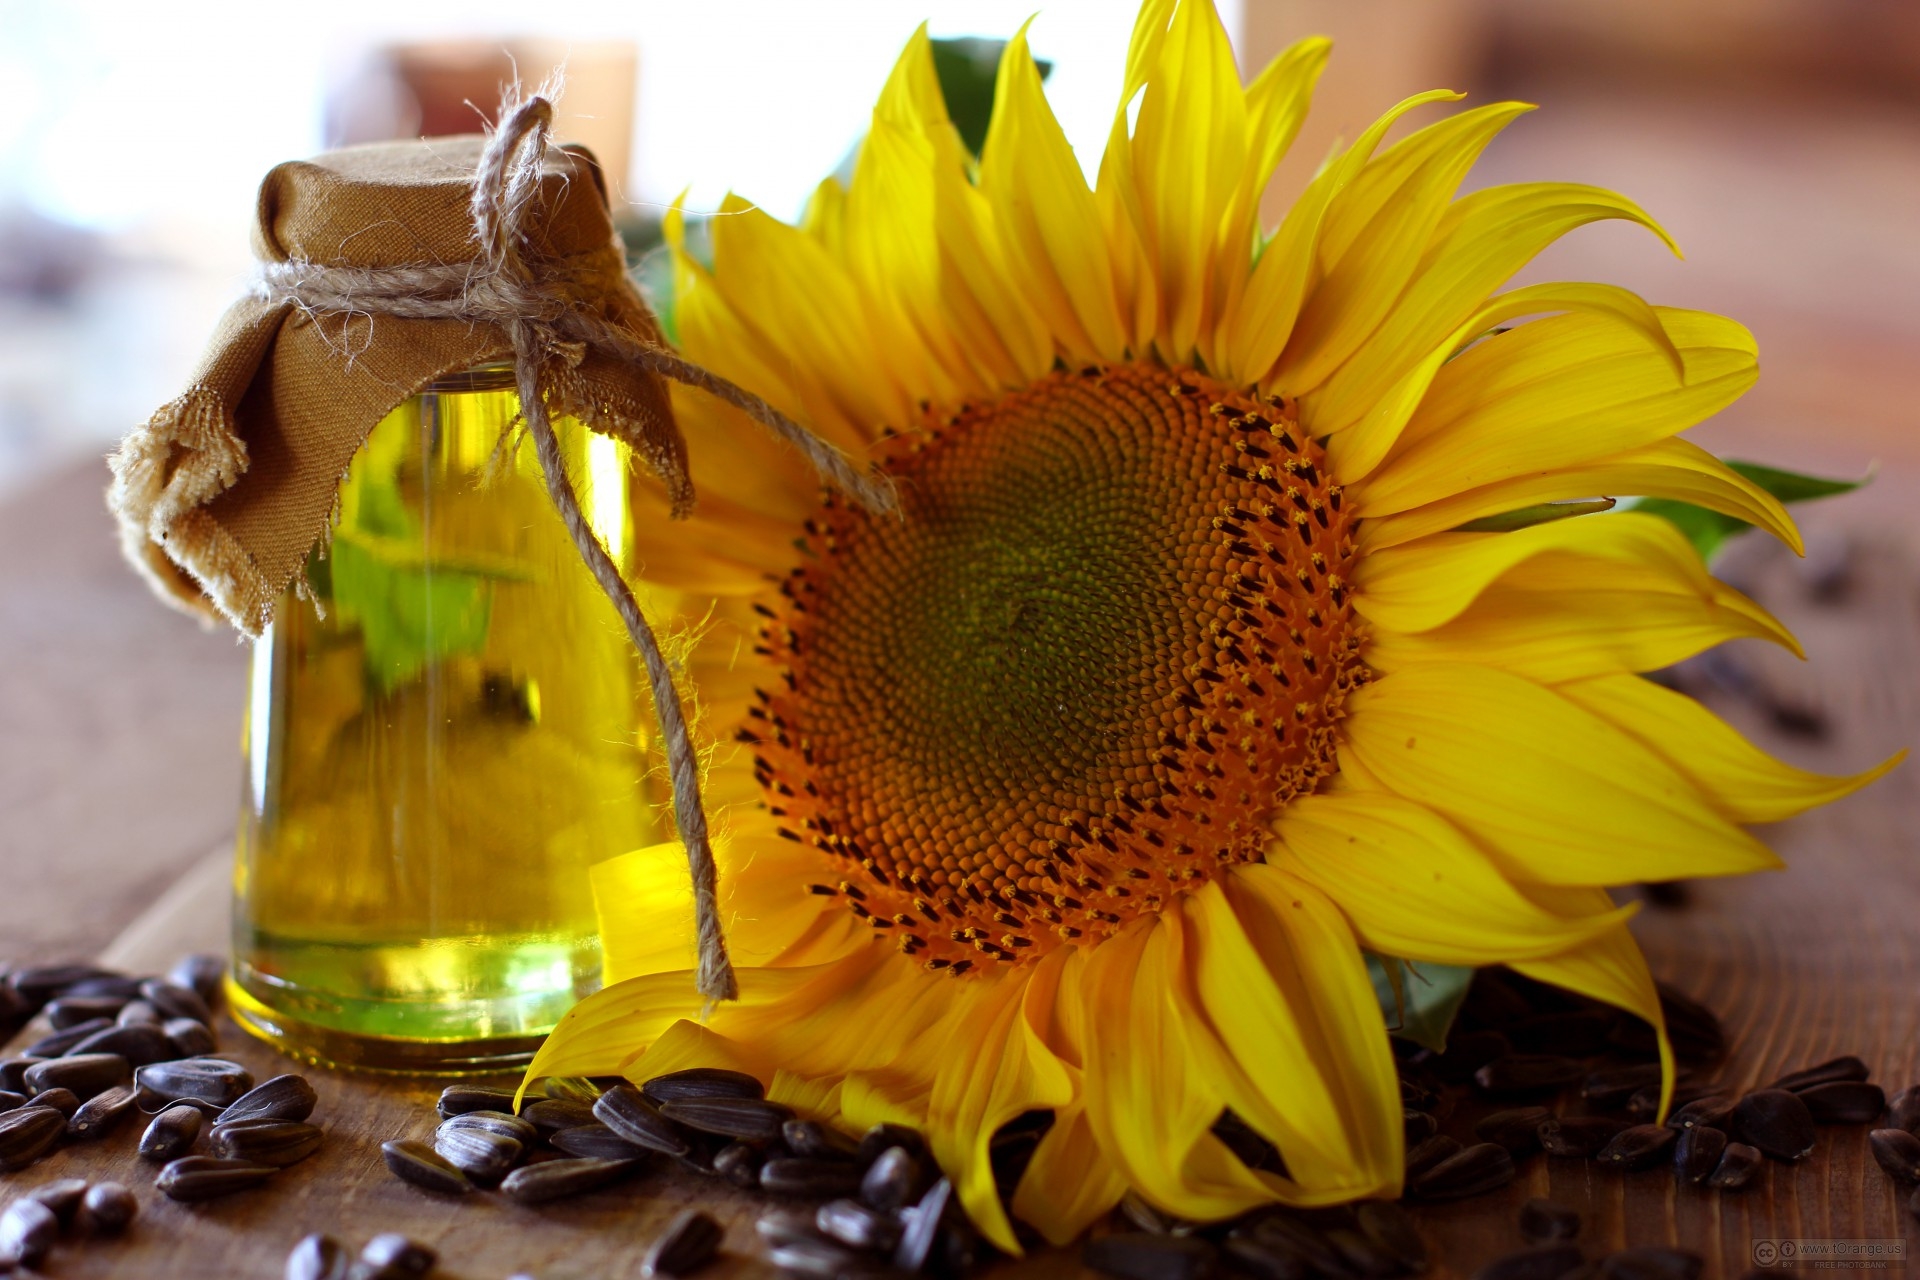 In 2022/23, Ukraine increased the production and export of sunflower oil